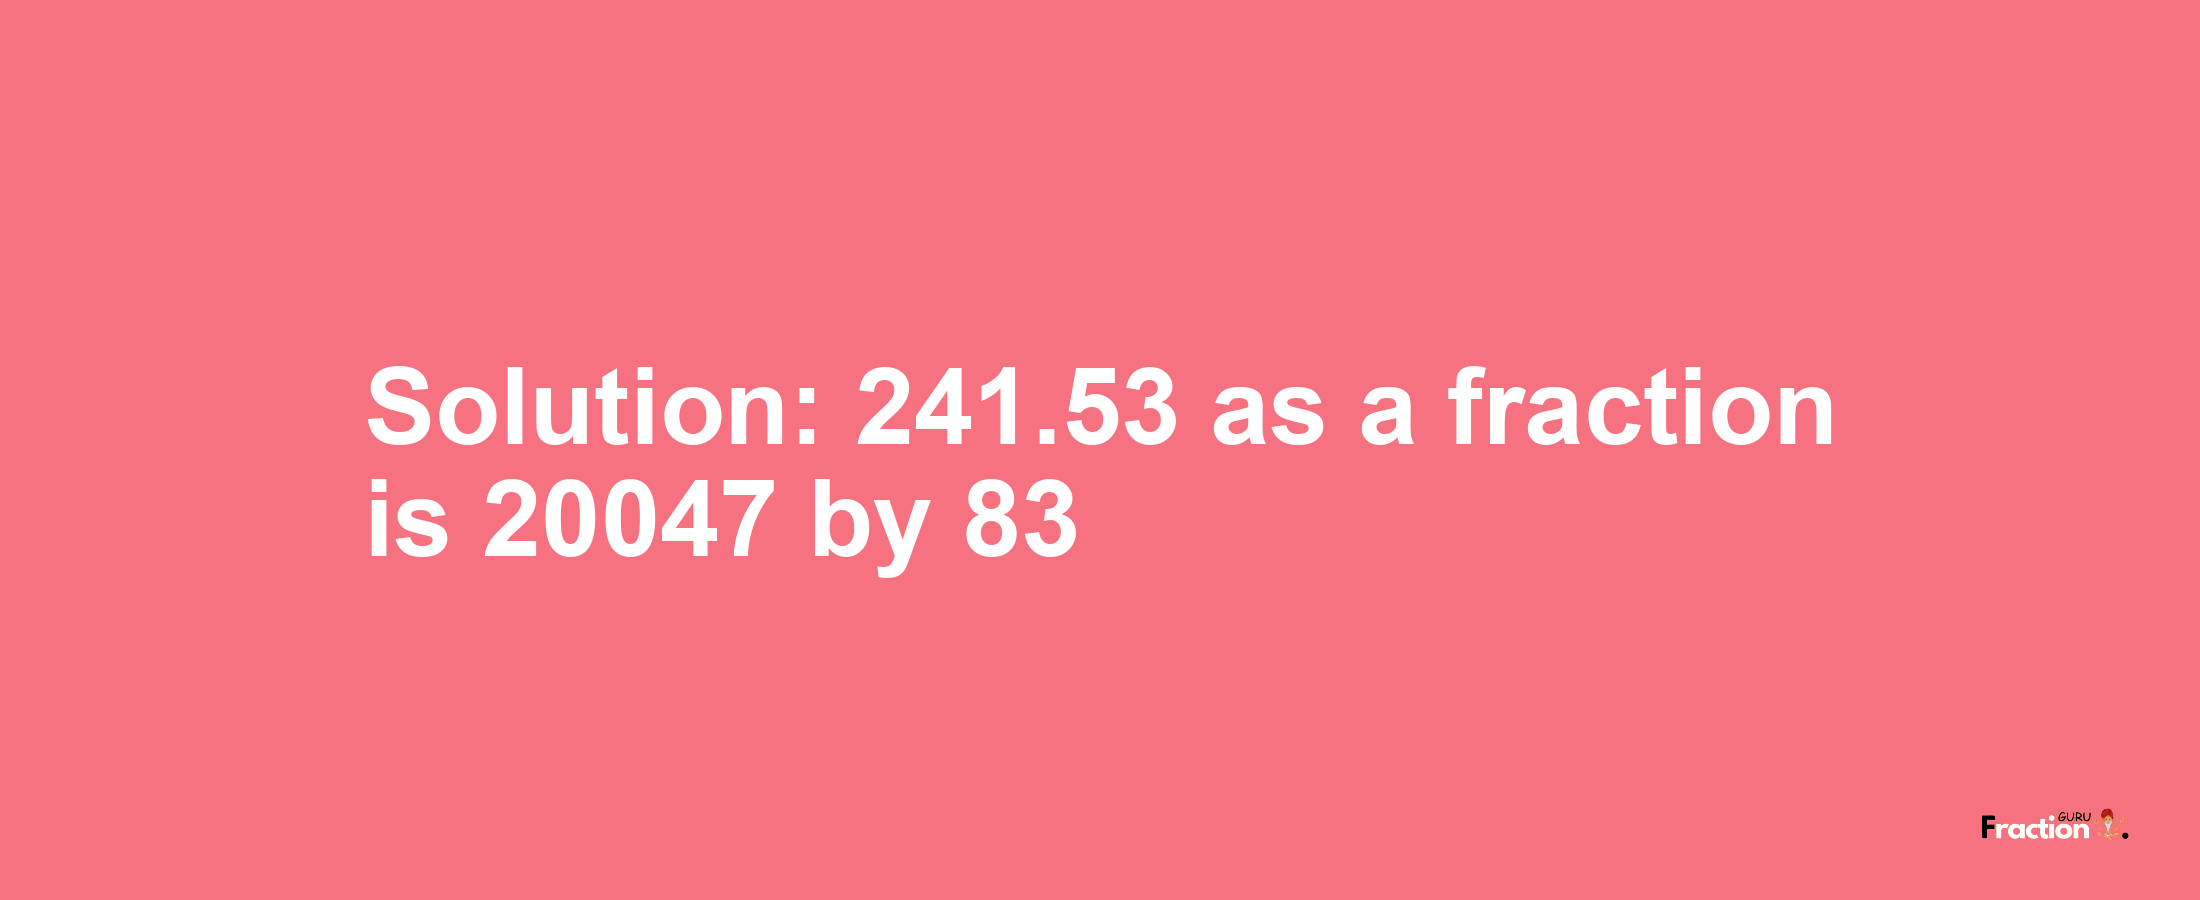 Solution:241.53 as a fraction is 20047/83